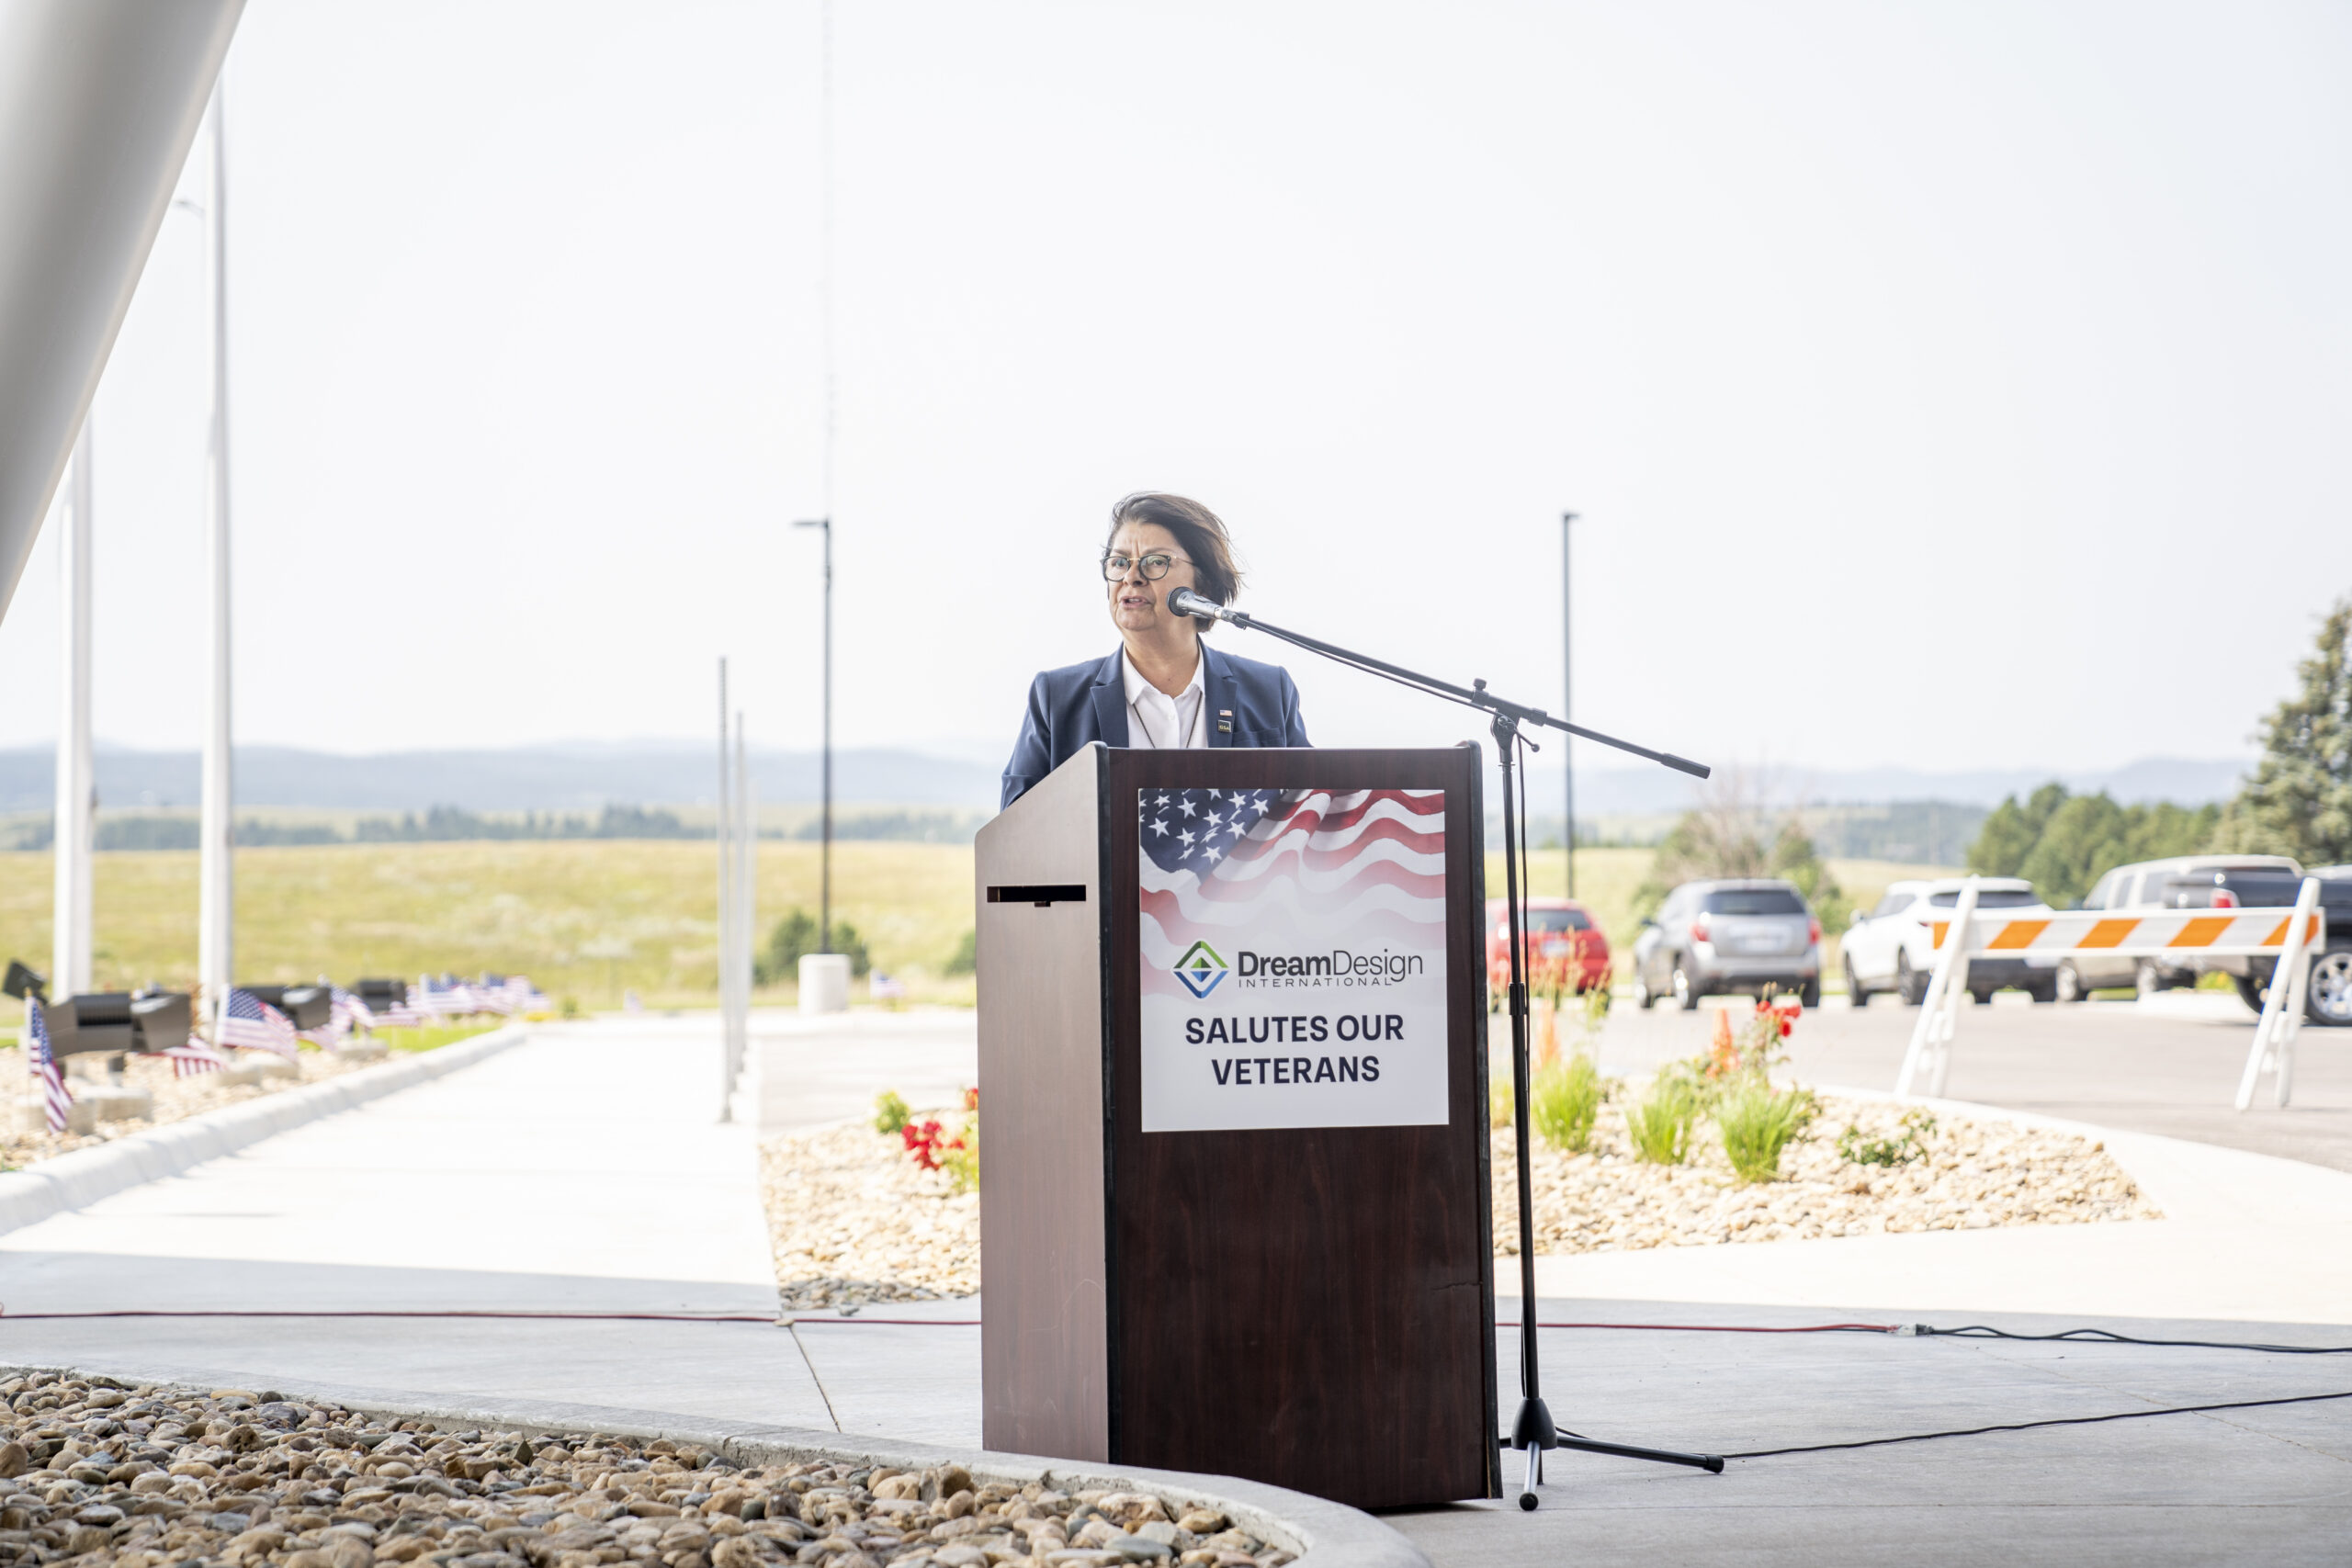 A representative of the GSA speaks at the grand opening of the VA Clinic in Rapid City South Dakota